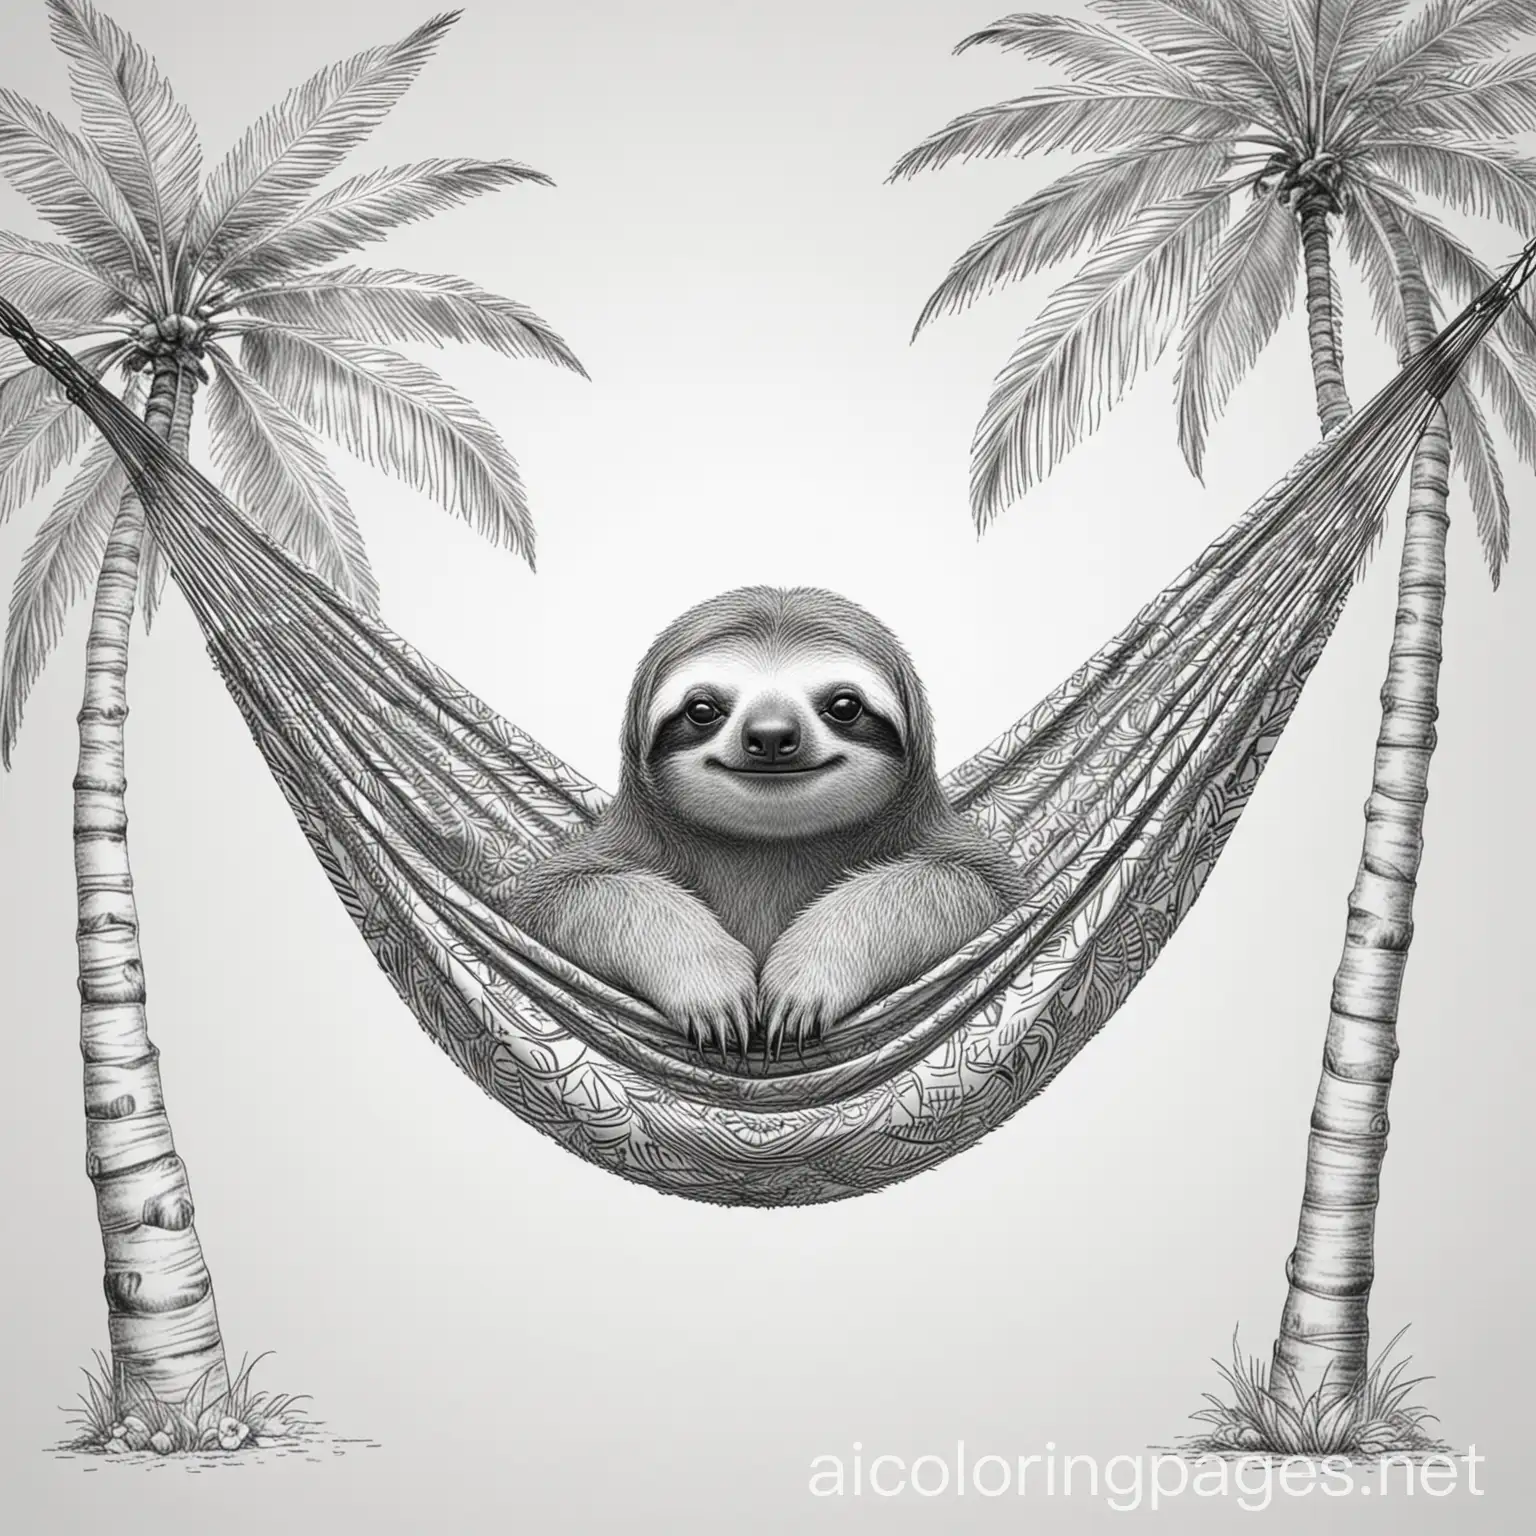 summer sloth laying on a hammock between 2 palm trees with a simple background , Coloring Page, black and white, line art, white background, Simplicity, Ample White Space. The background of the coloring page is plain white to make it easy for young children to color within the lines. The outlines of all the subjects are easy to distinguish, making it simple for kids to color without too much difficulty